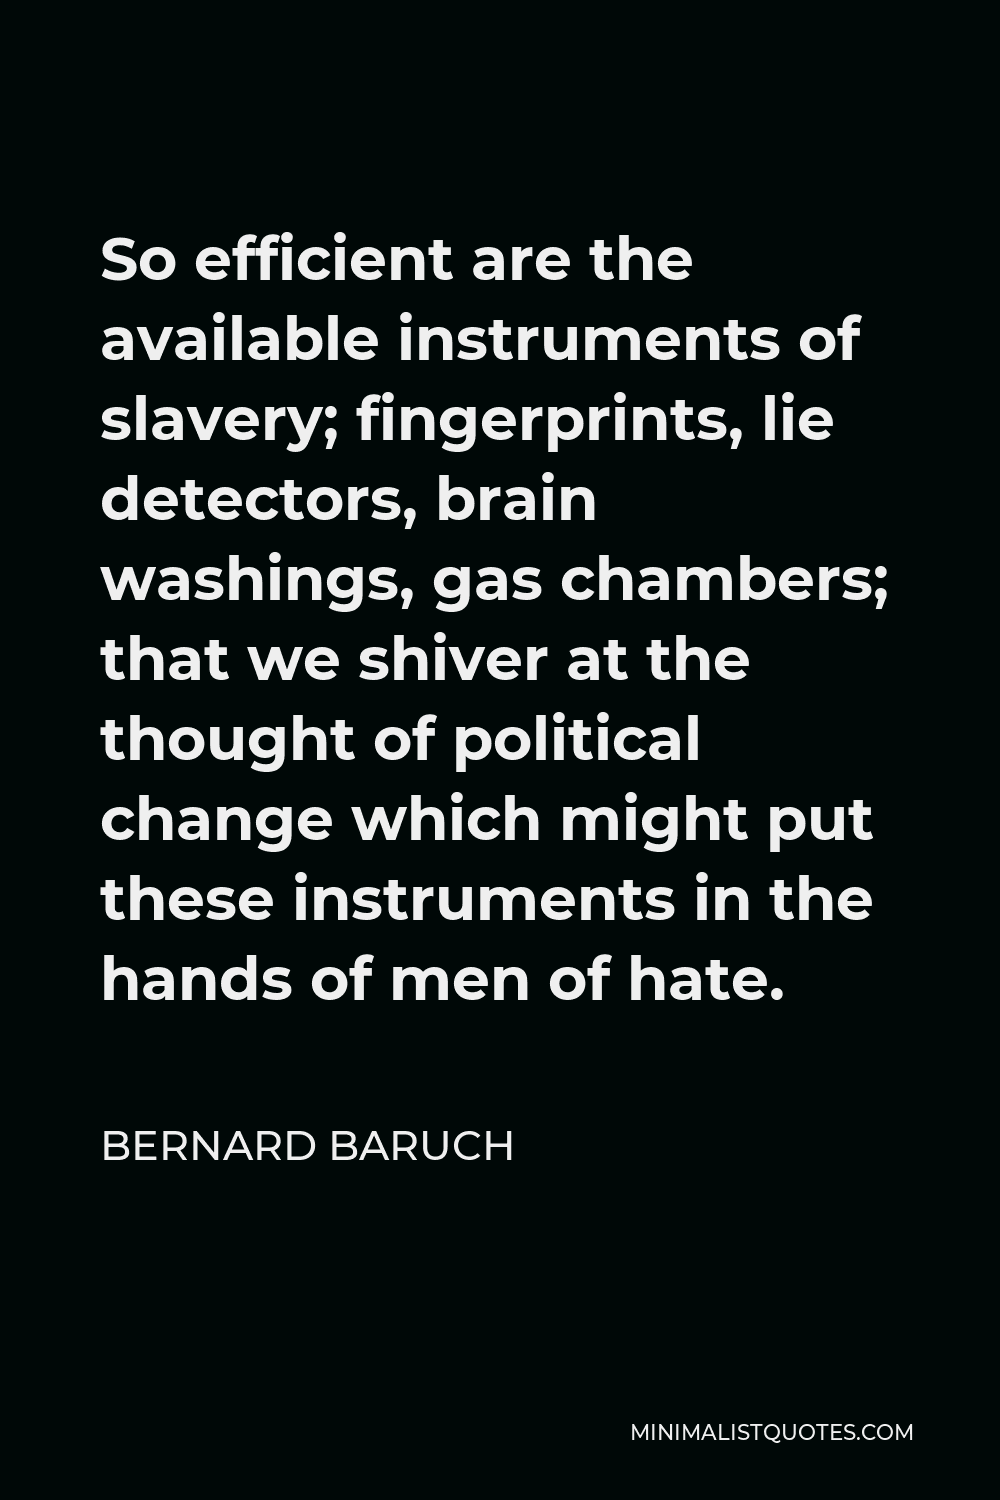 Bernard Baruch Quote - So efficient are the available instruments of slavery; fingerprints, lie detectors, brain washings, gas chambers; that we shiver at the thought of political change which might put these instruments in the hands of men of hate.